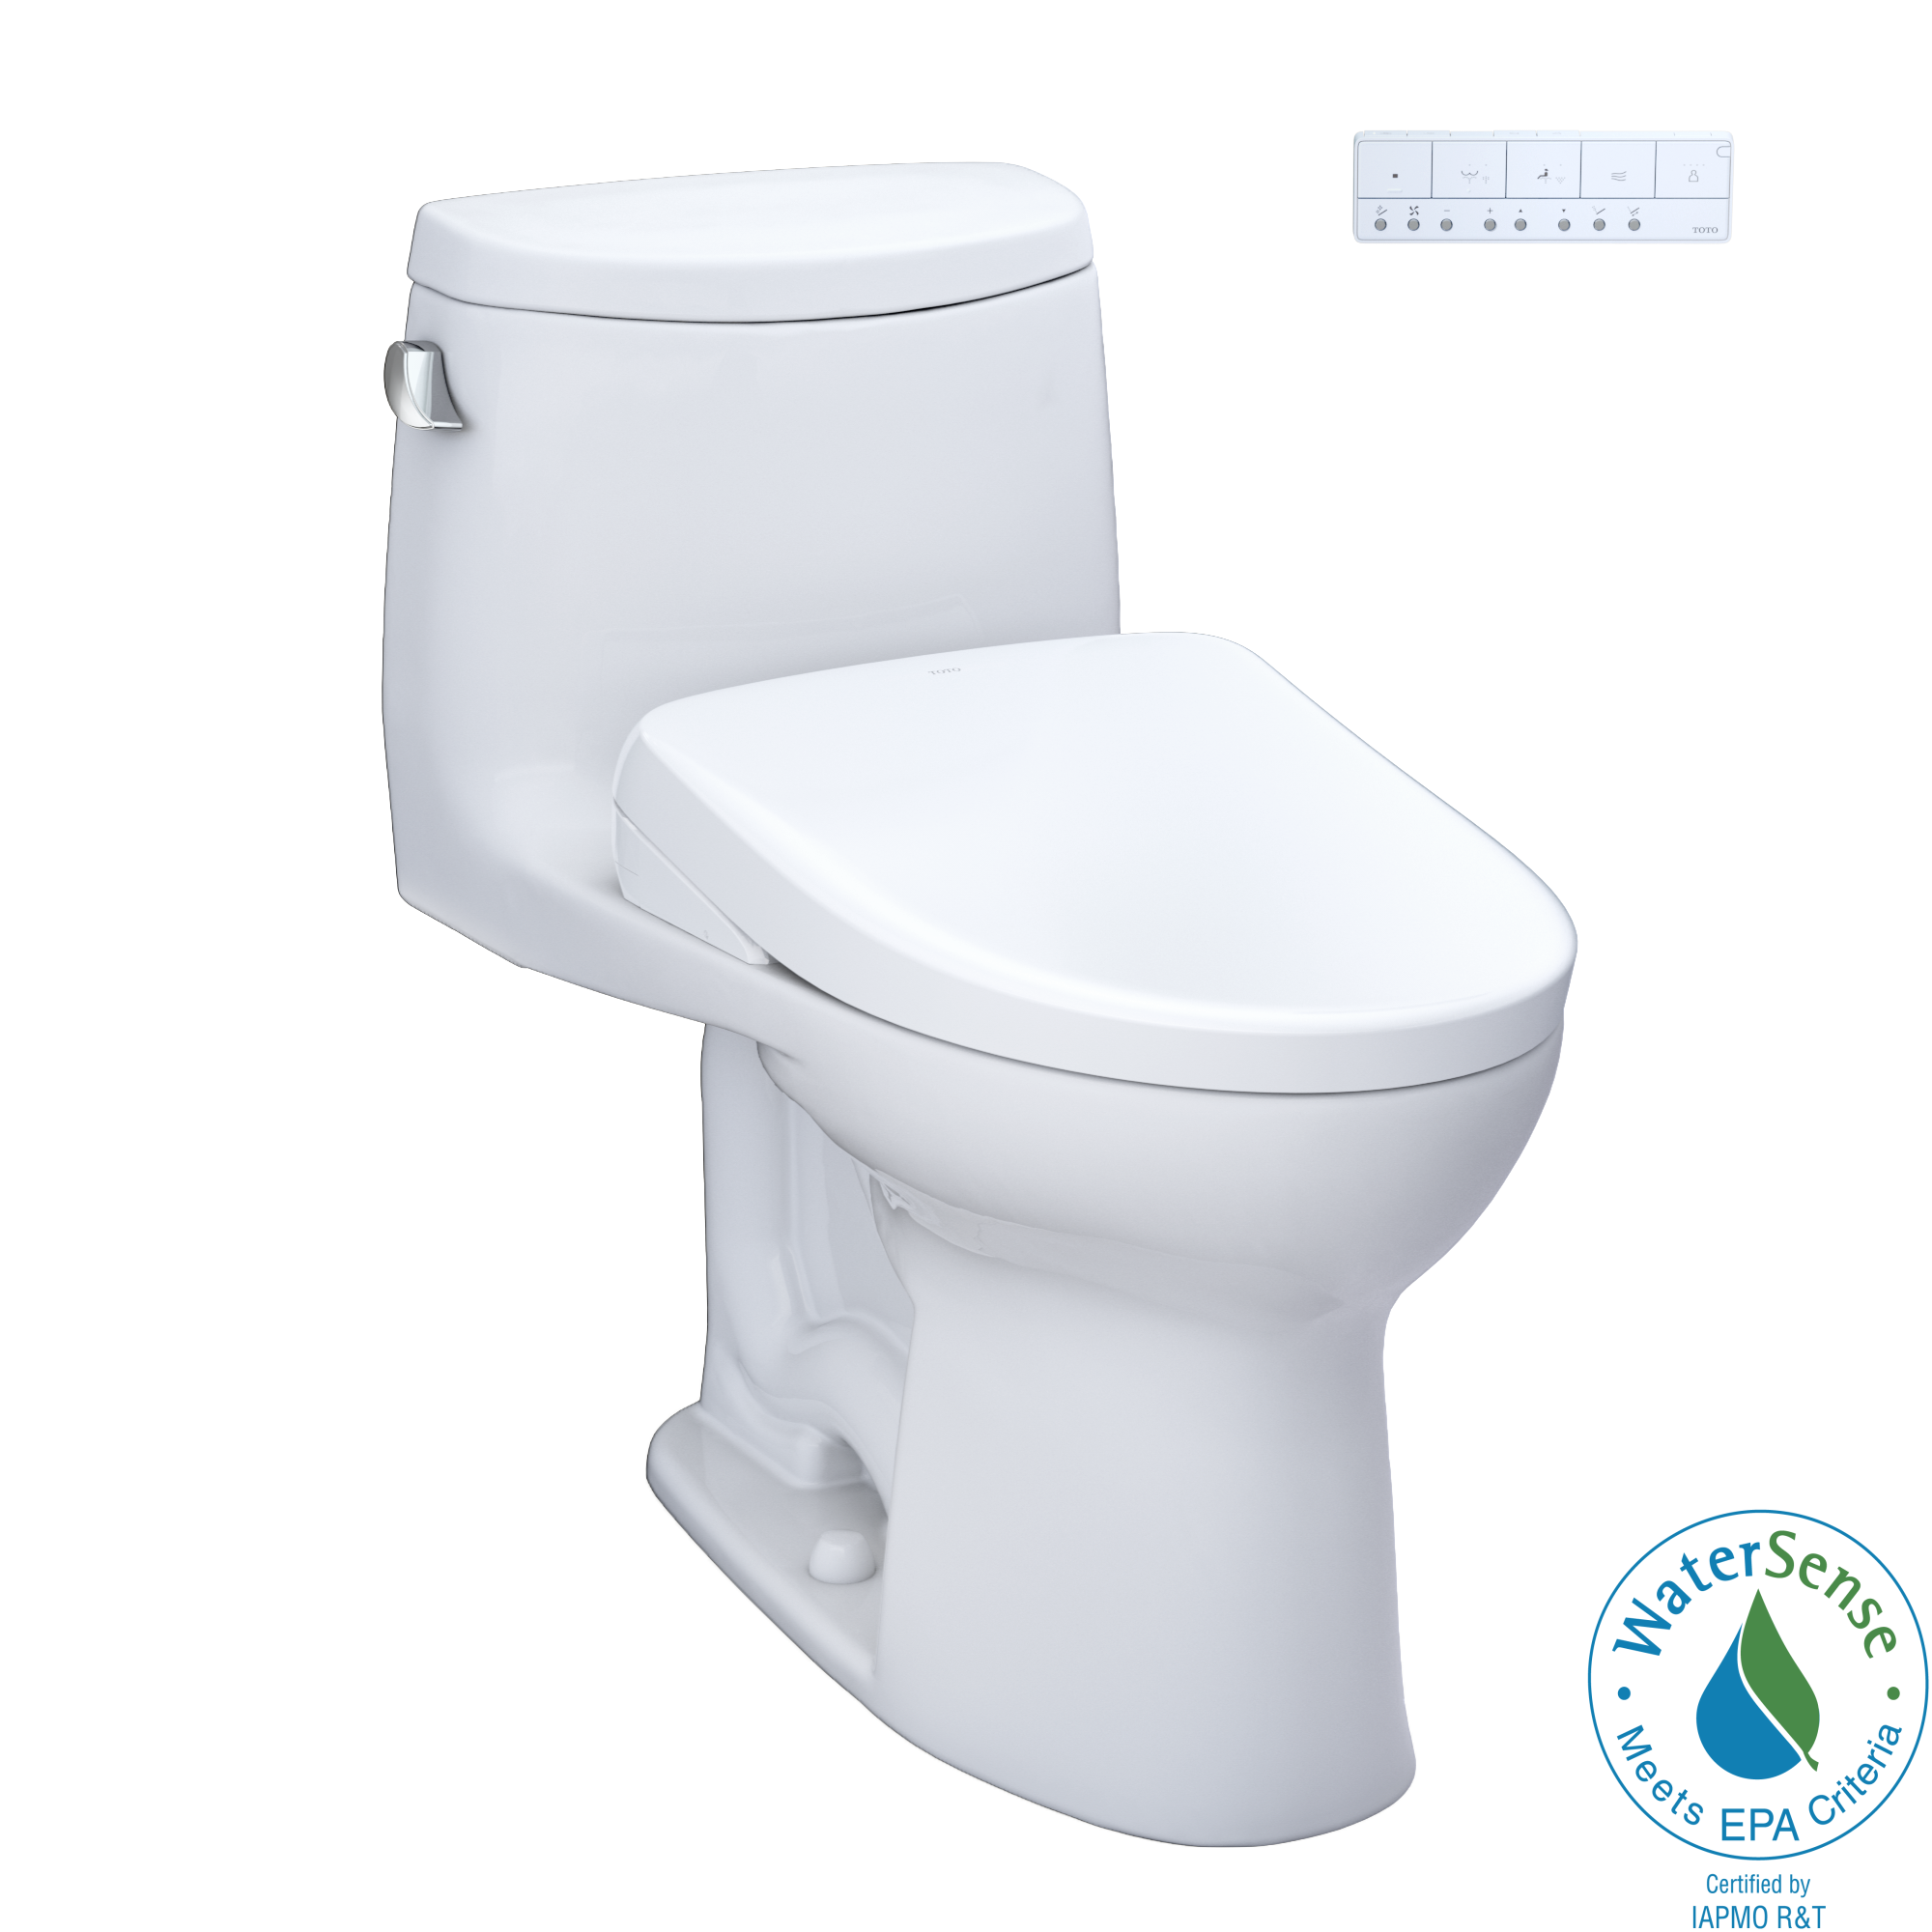 TOTO WASHLET+ Cotton White Elongated Standard Height Soft Close Toilet 12-in Rough-In with Bidet 1.28-GPF | MW6044736CEFG-01 -  MW6044736CEFG#01